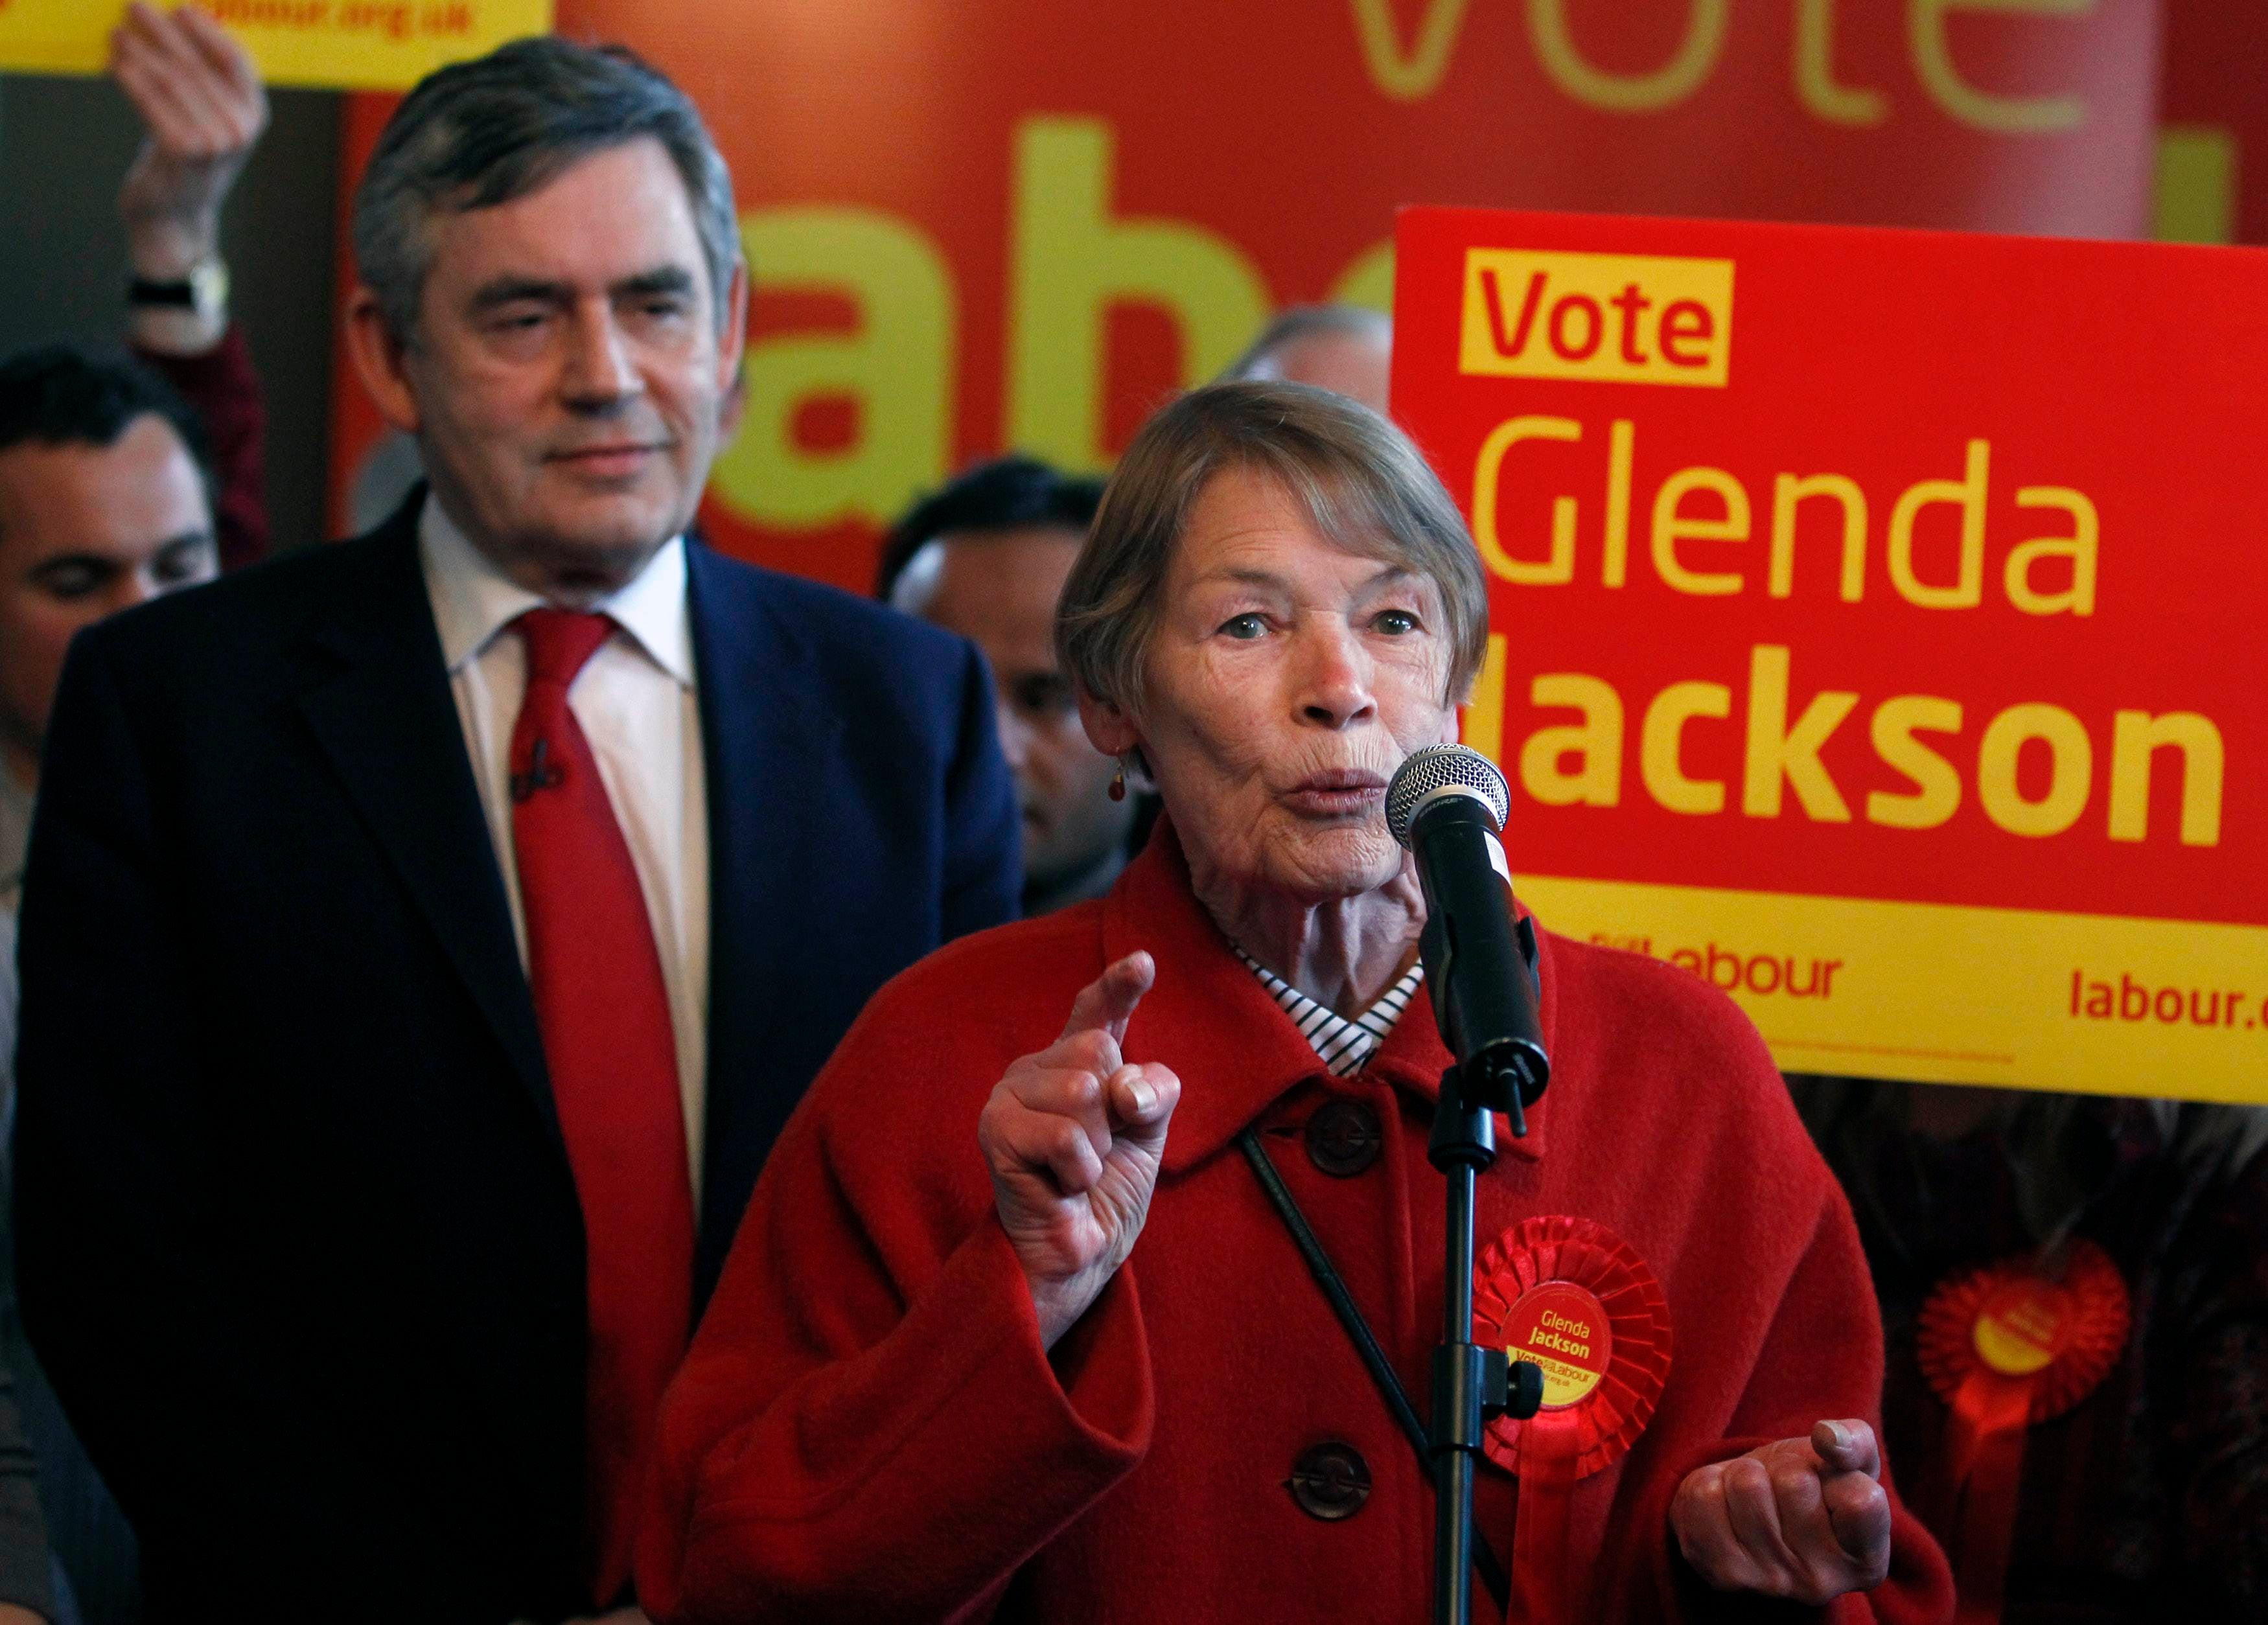 Glenda Jackson on the campaign trail with Labour’s then prime minister, Gordon Brown, in 2010